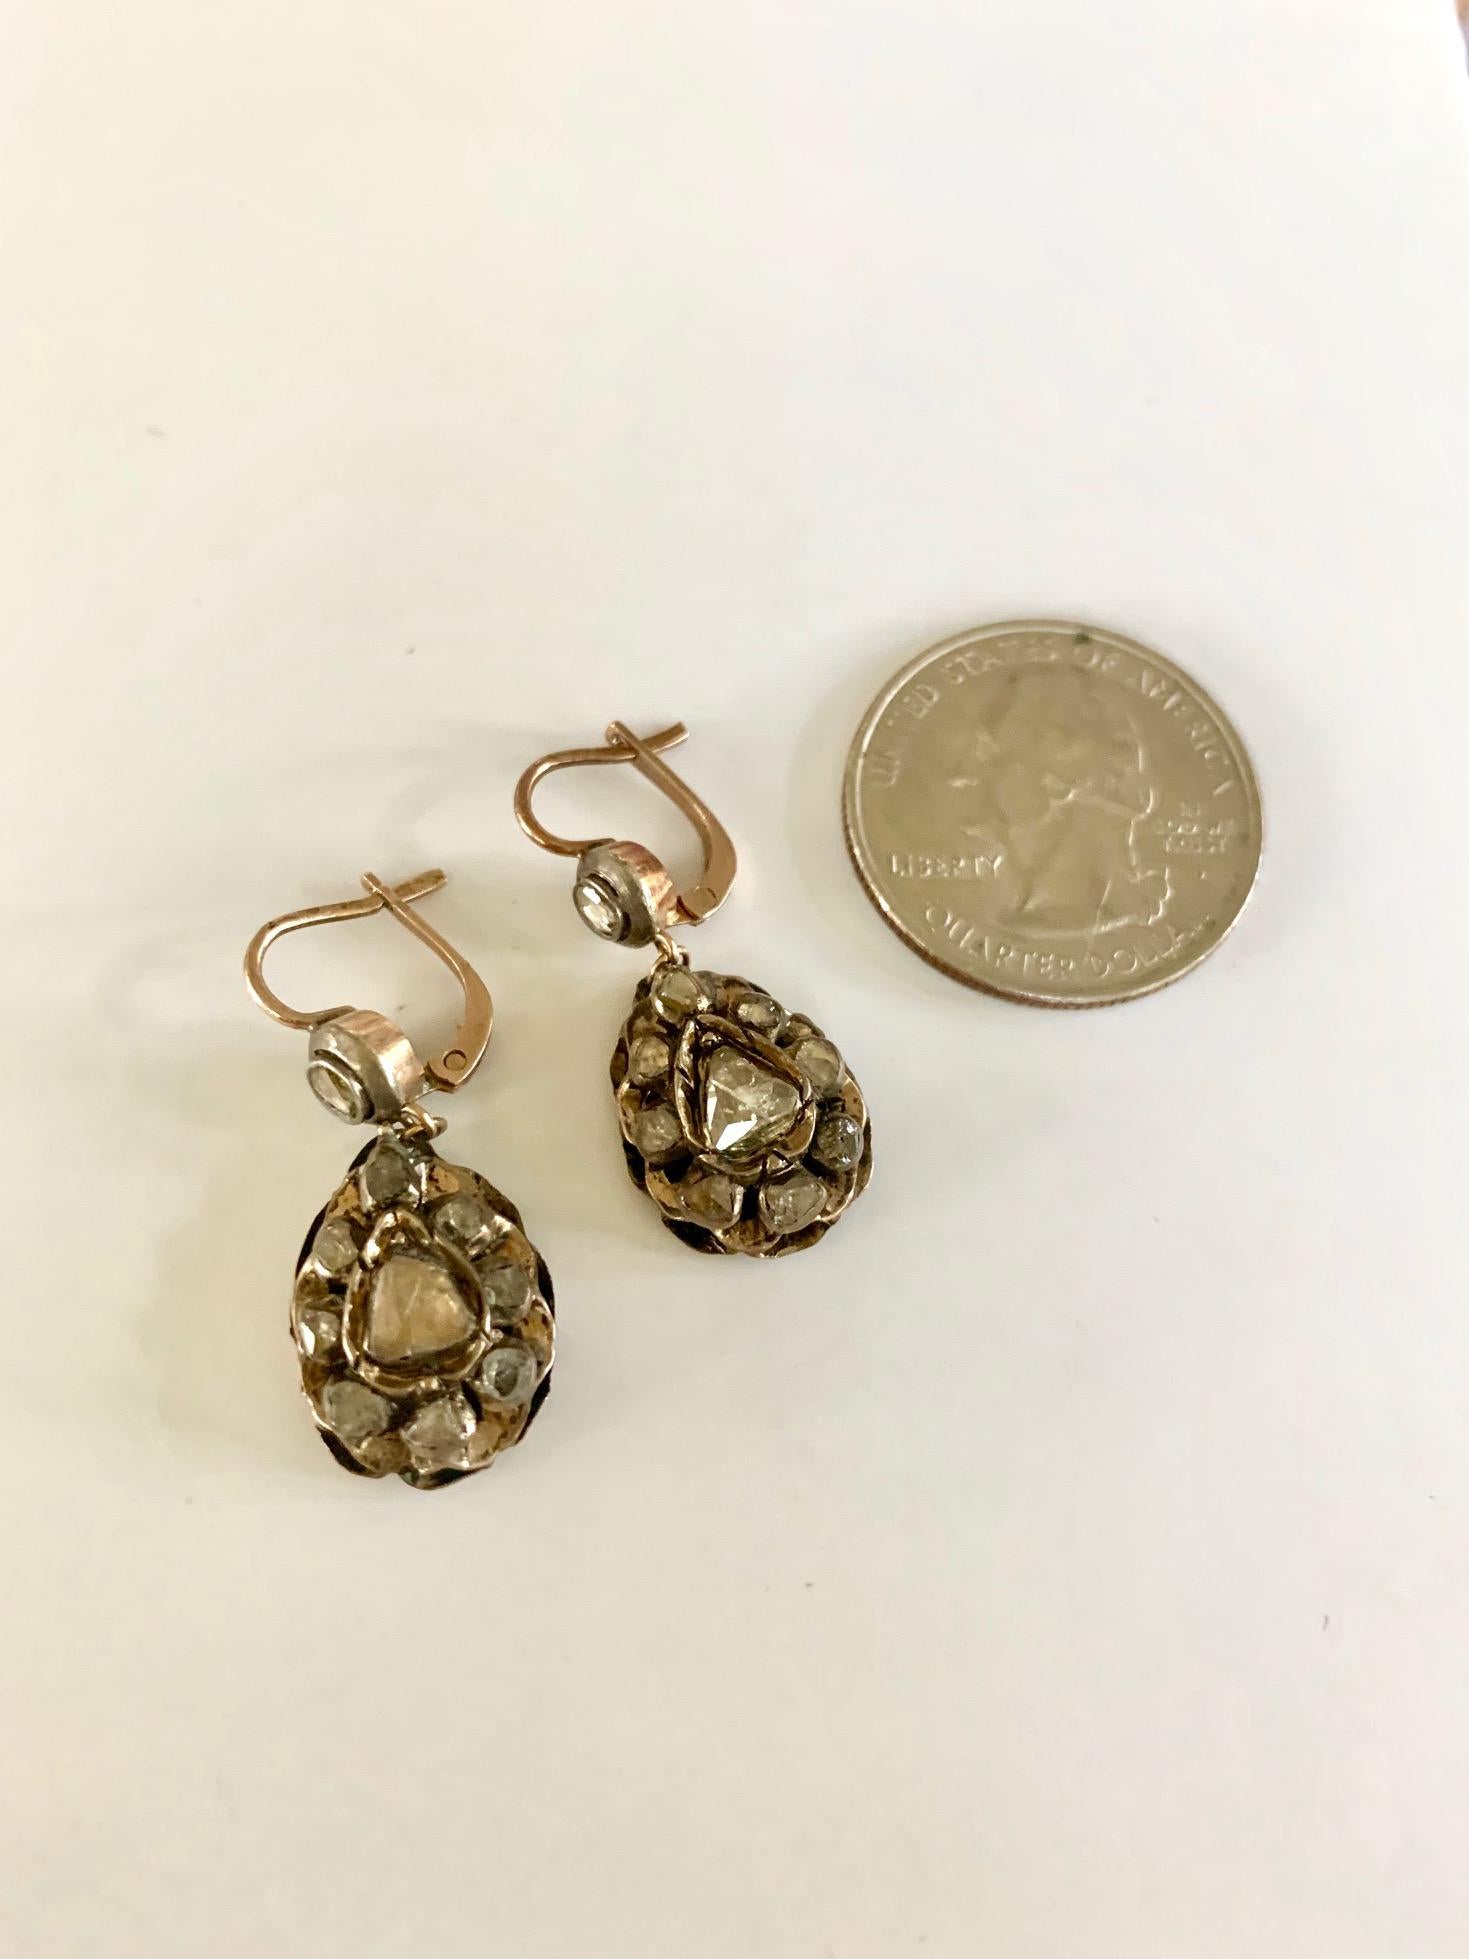 Antique Rose Cut Diamond 9 Karat Gold and Silver Drop French Hook Earrings For Sale 3